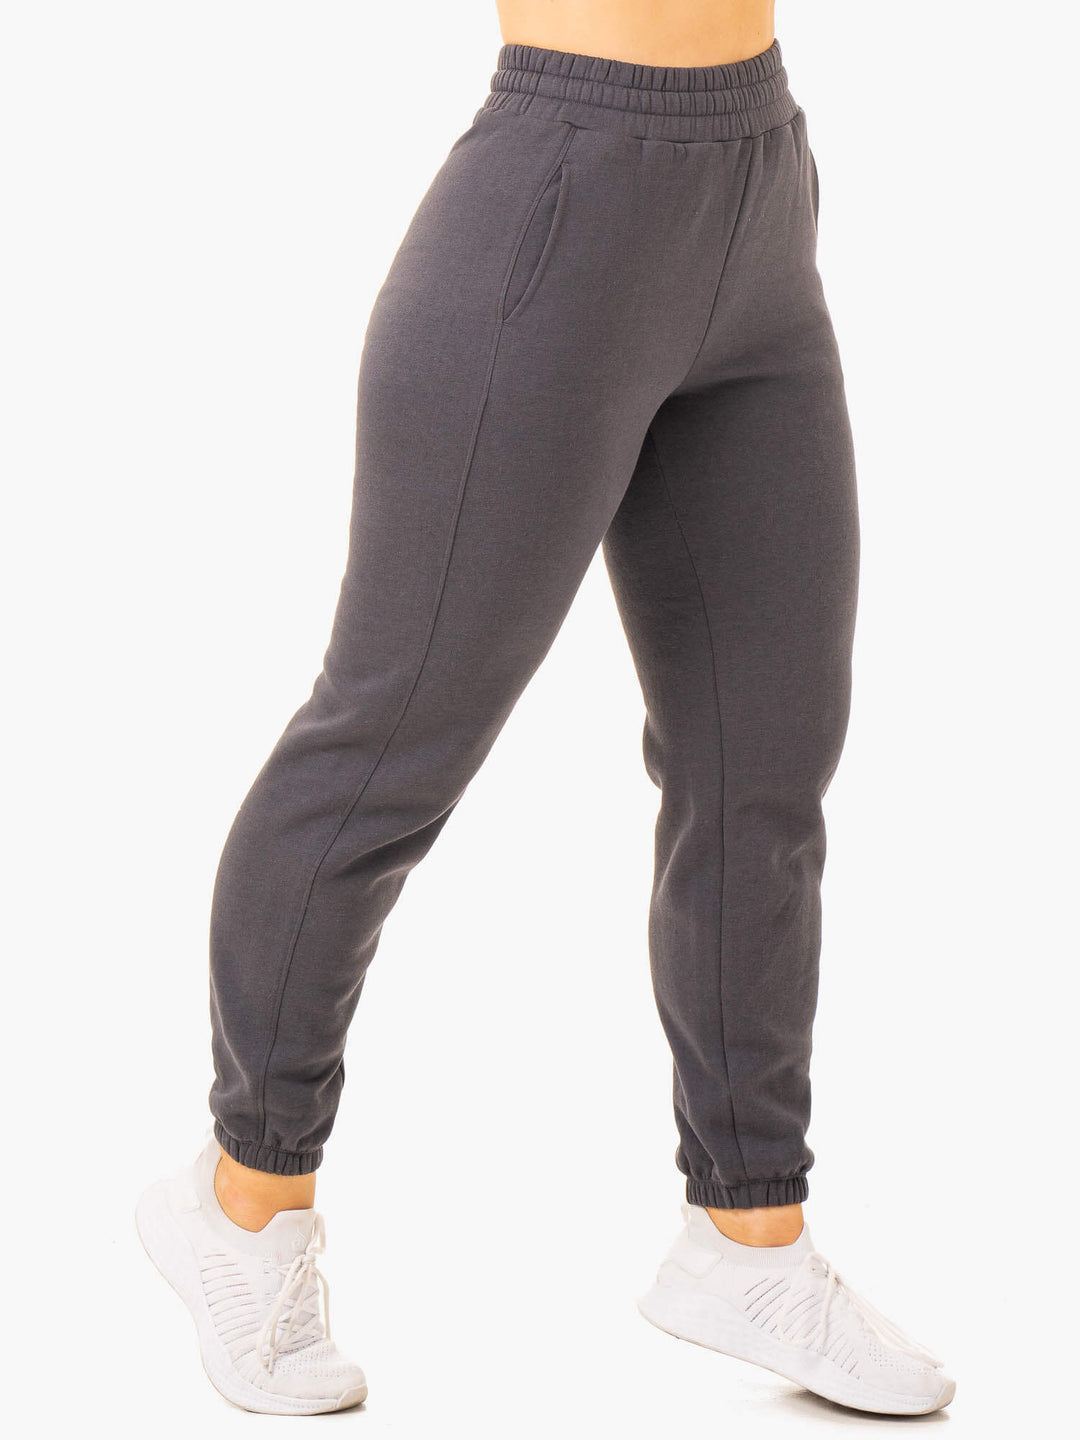 Sideline Track Pants - Charcoal Clothing Ryderwear 